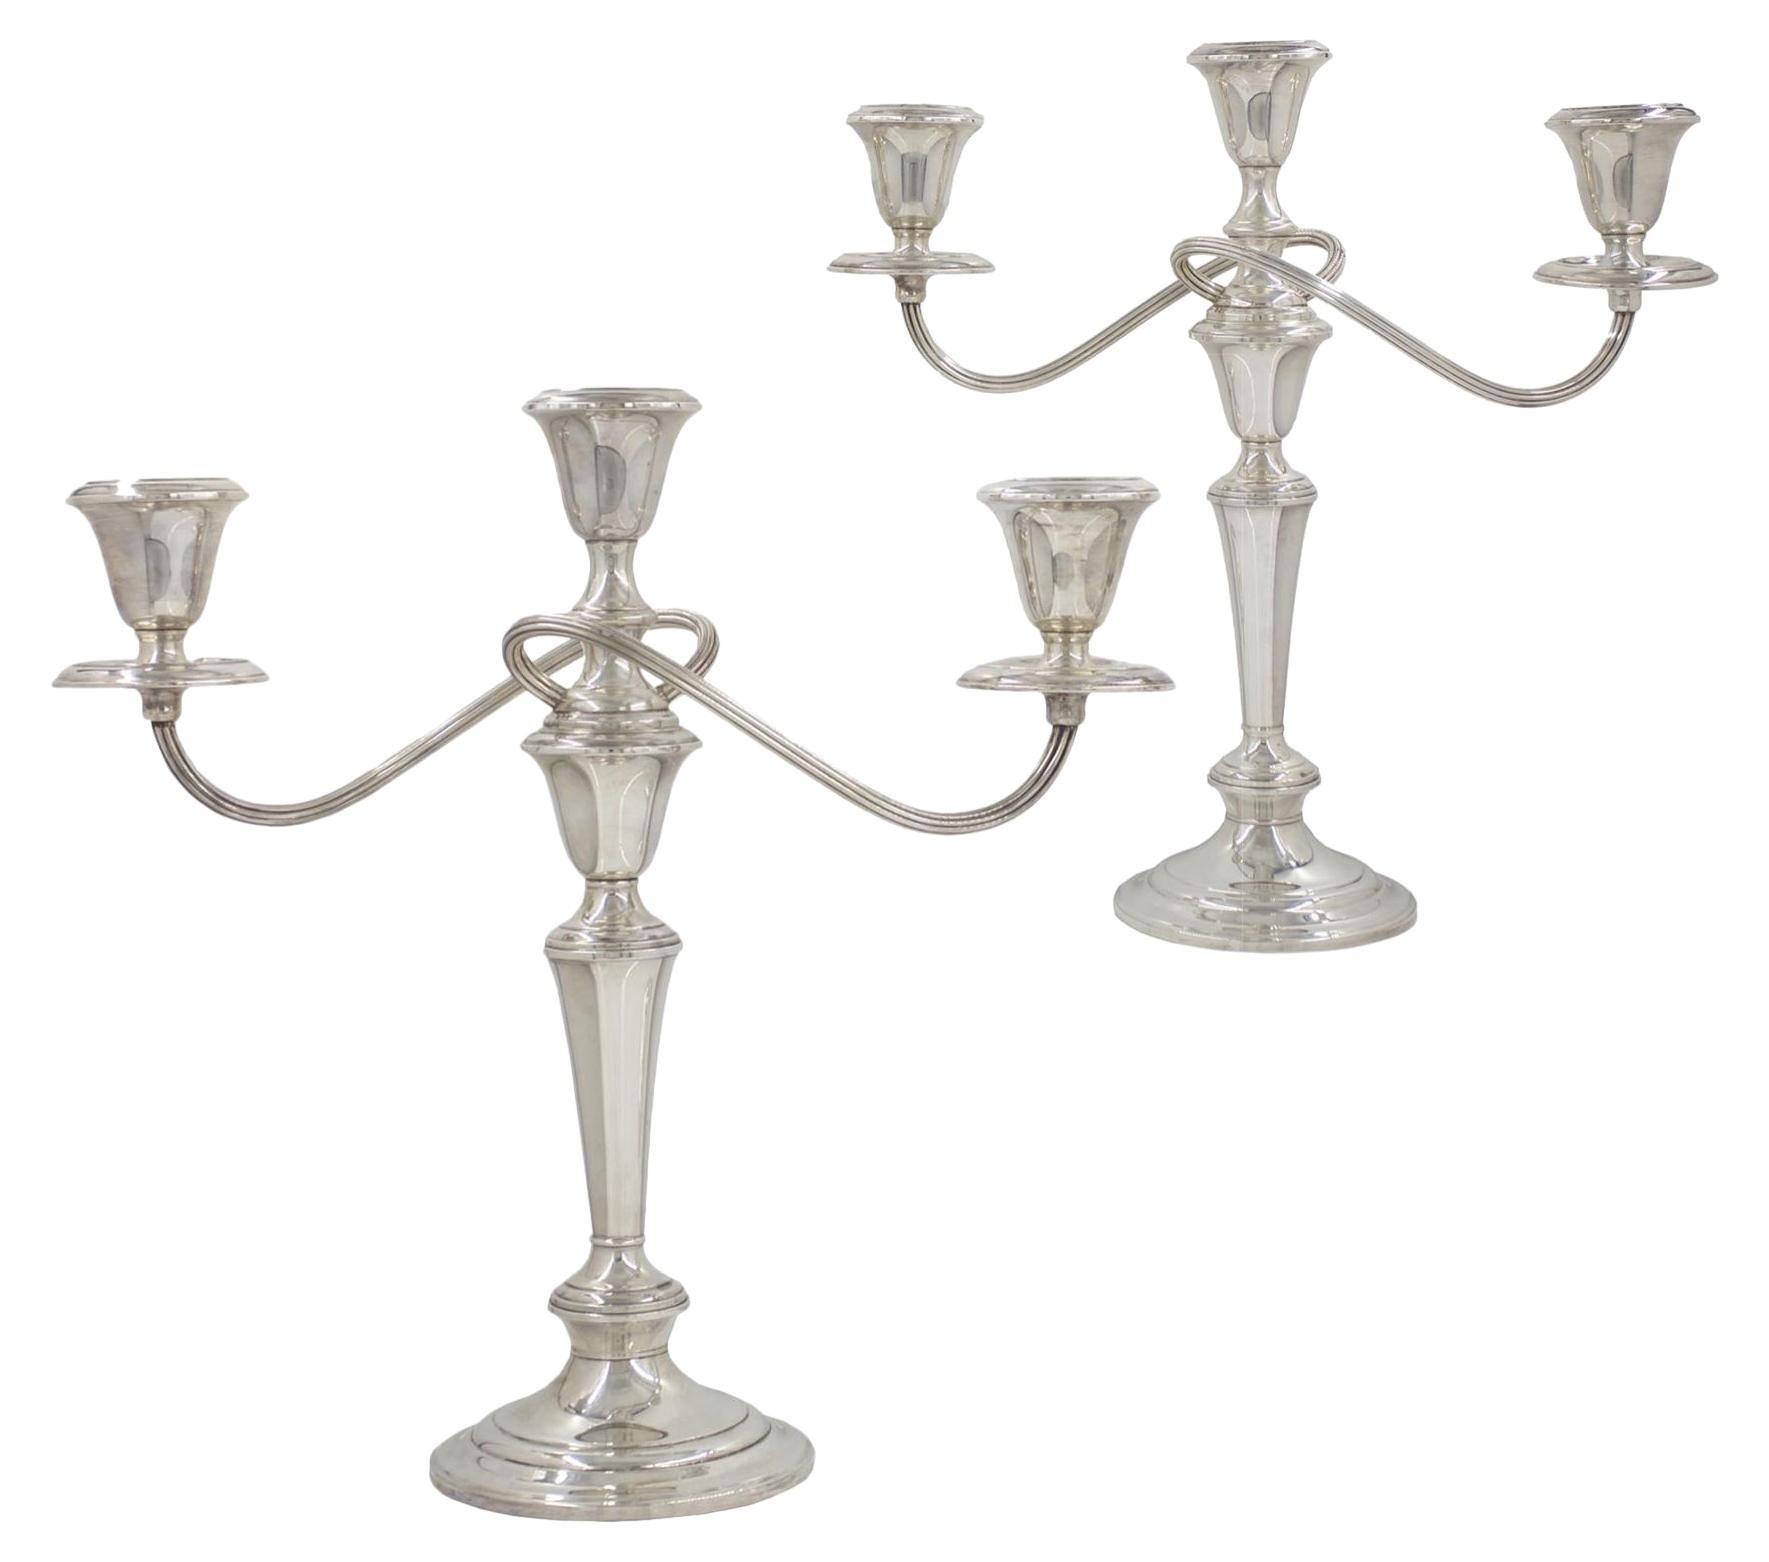 Pair of Gorham Co. Weighted Sterling Silver Twisted-Stem 3-Light Candelabra